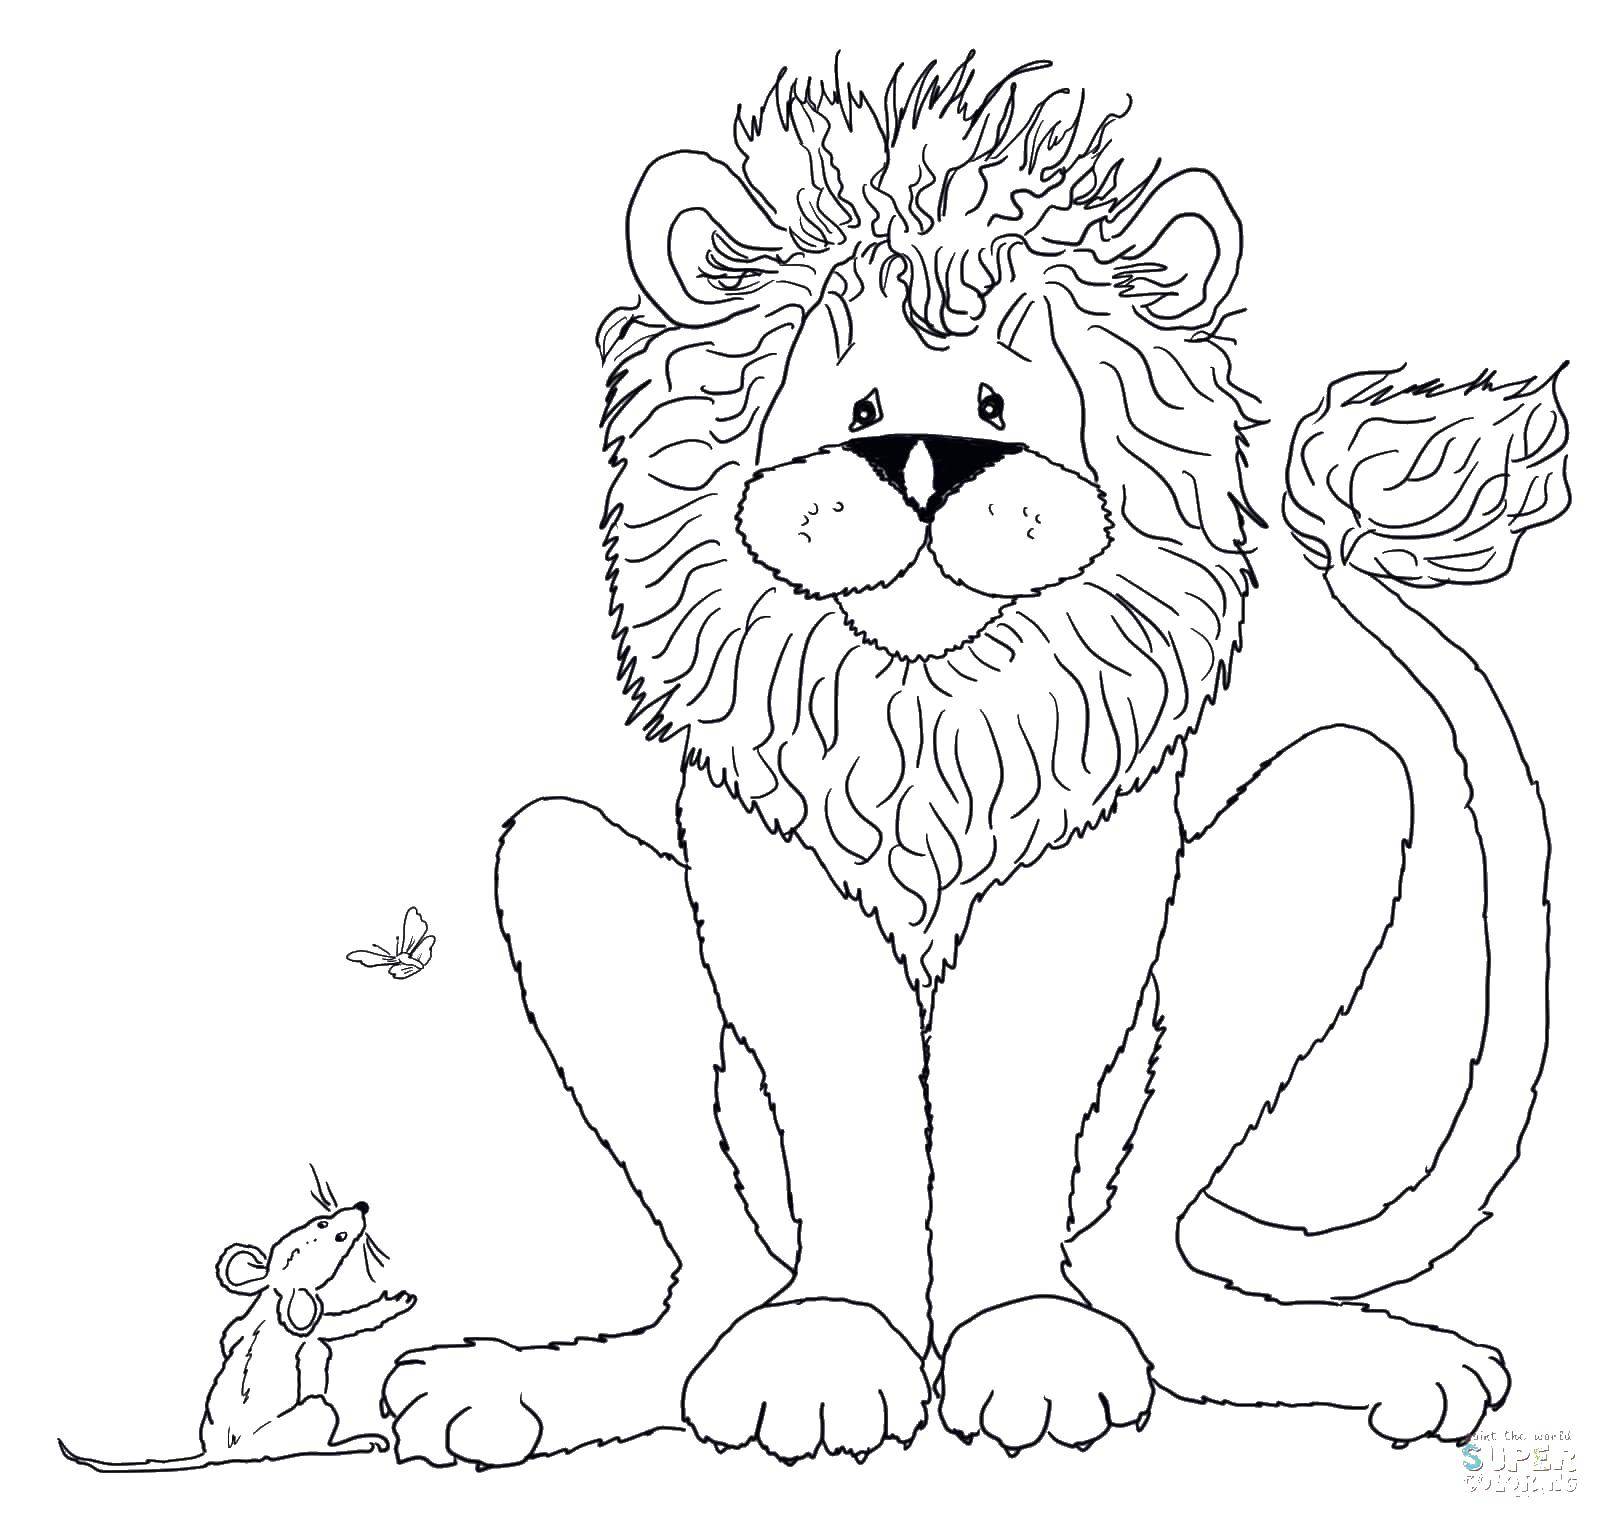 Coloring The lion and the mouse. Category Animals. Tags:  lion, mane, mouse.